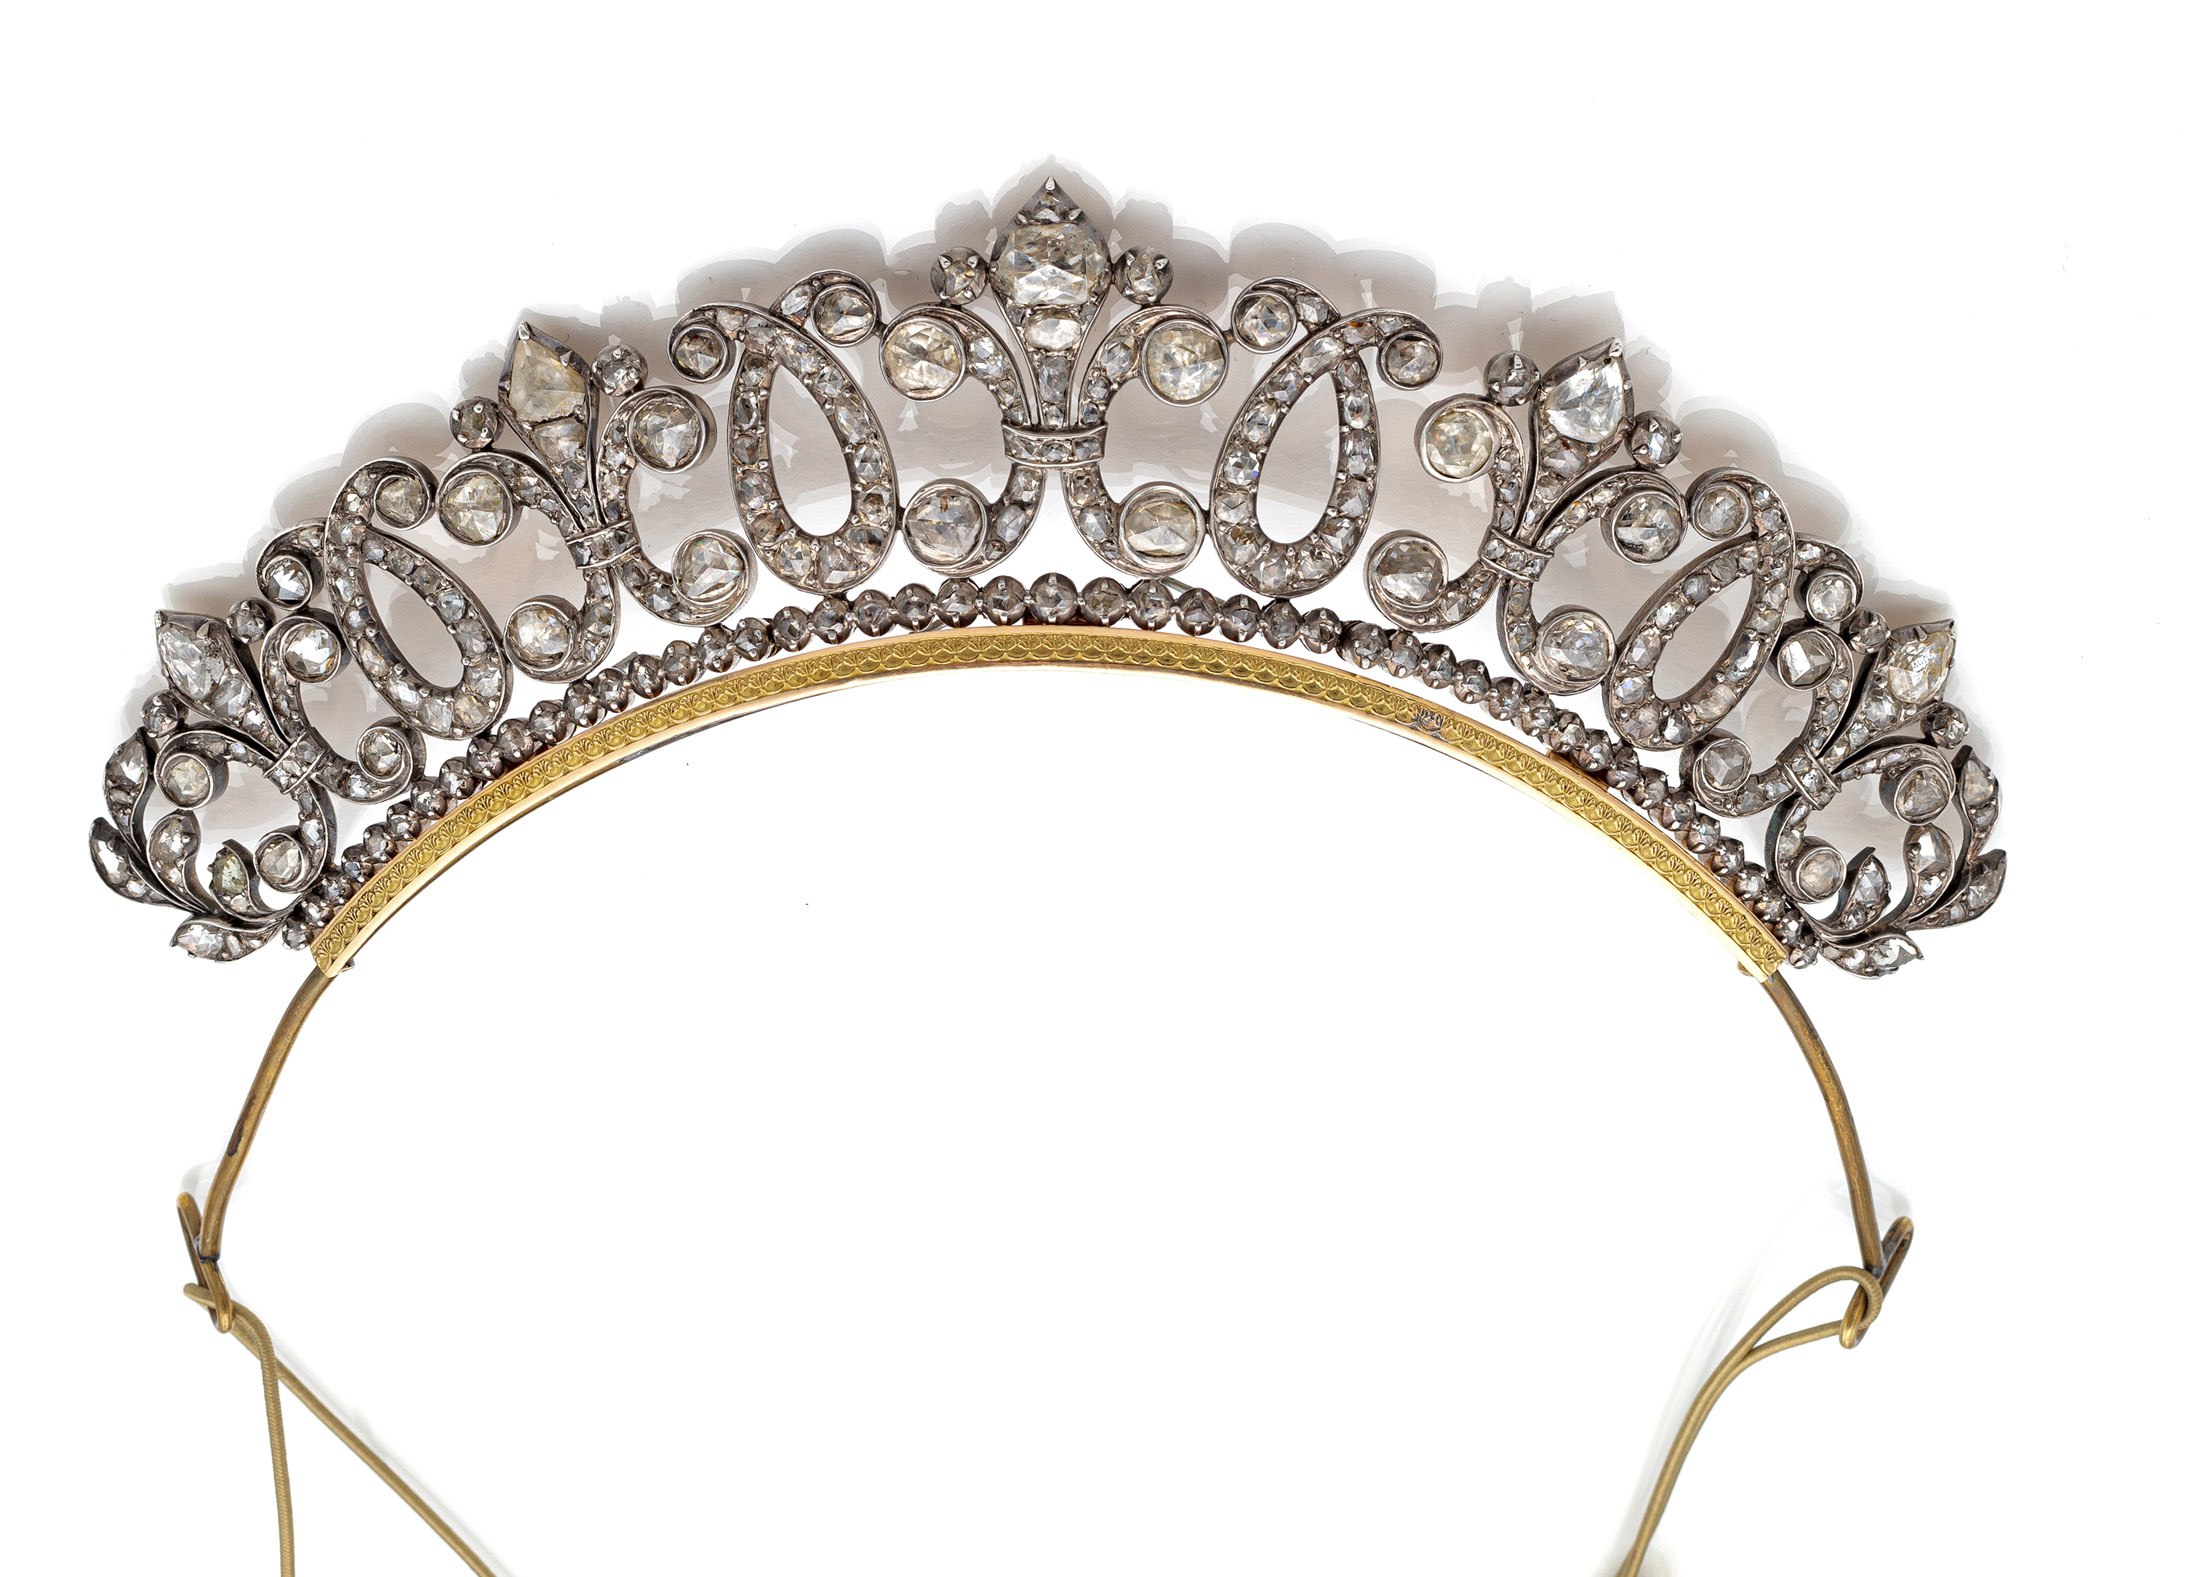 AN EXTREMELY RARE CLASSICAL TIARA WITH DIAMONDS